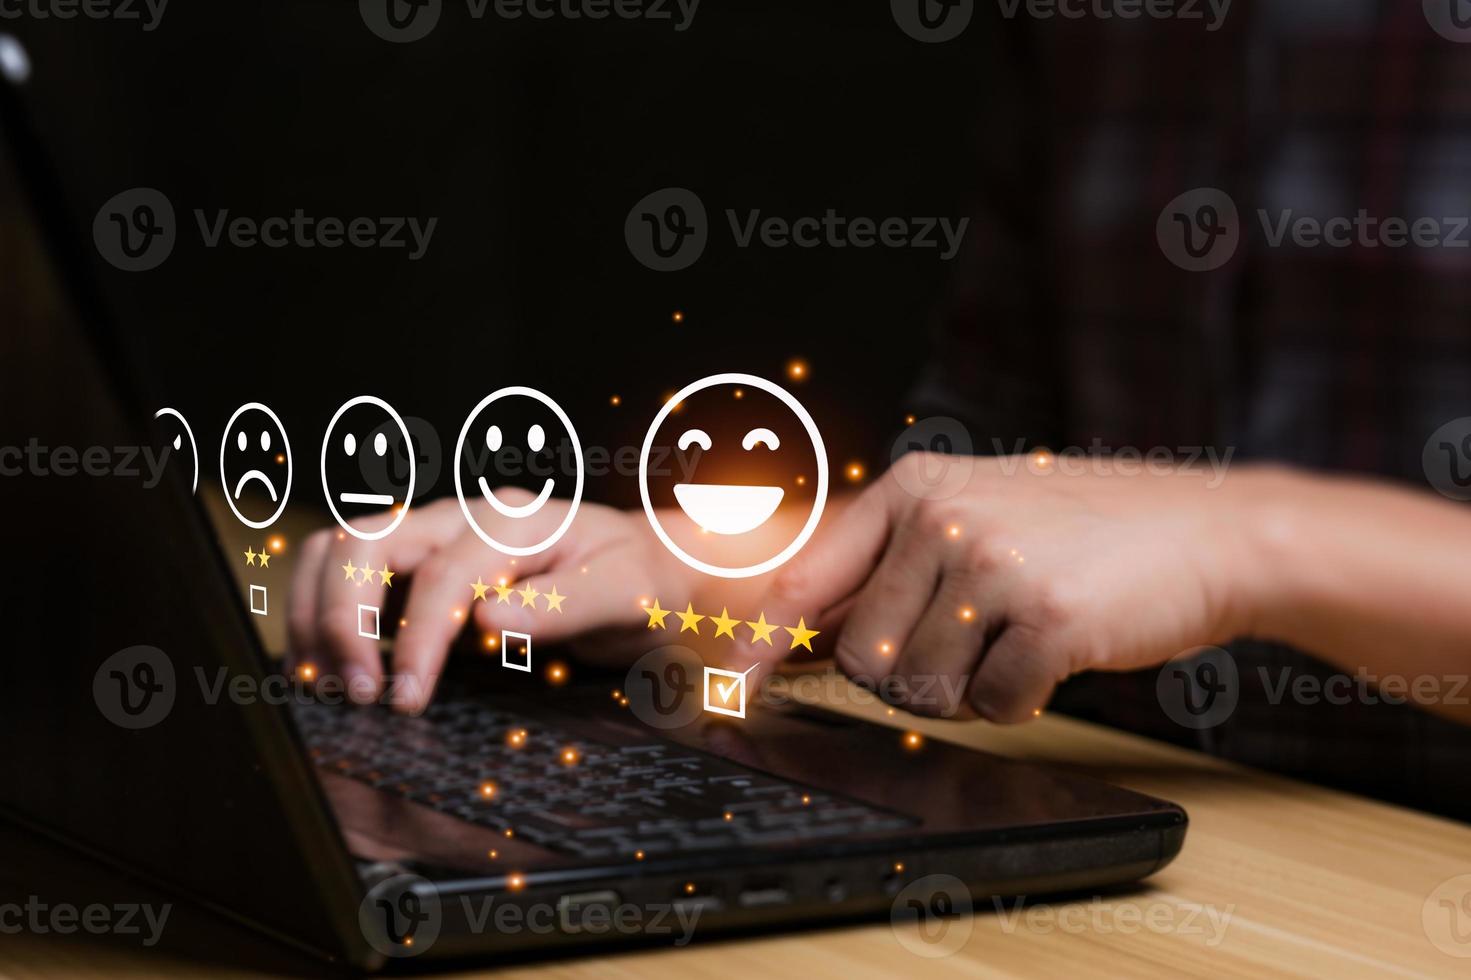 Customer satisfaction concept. Hand with thumb up Positive emotion smiley face icon and five star with copy space. 5 star satisfaction, Excellent business rating experience photo